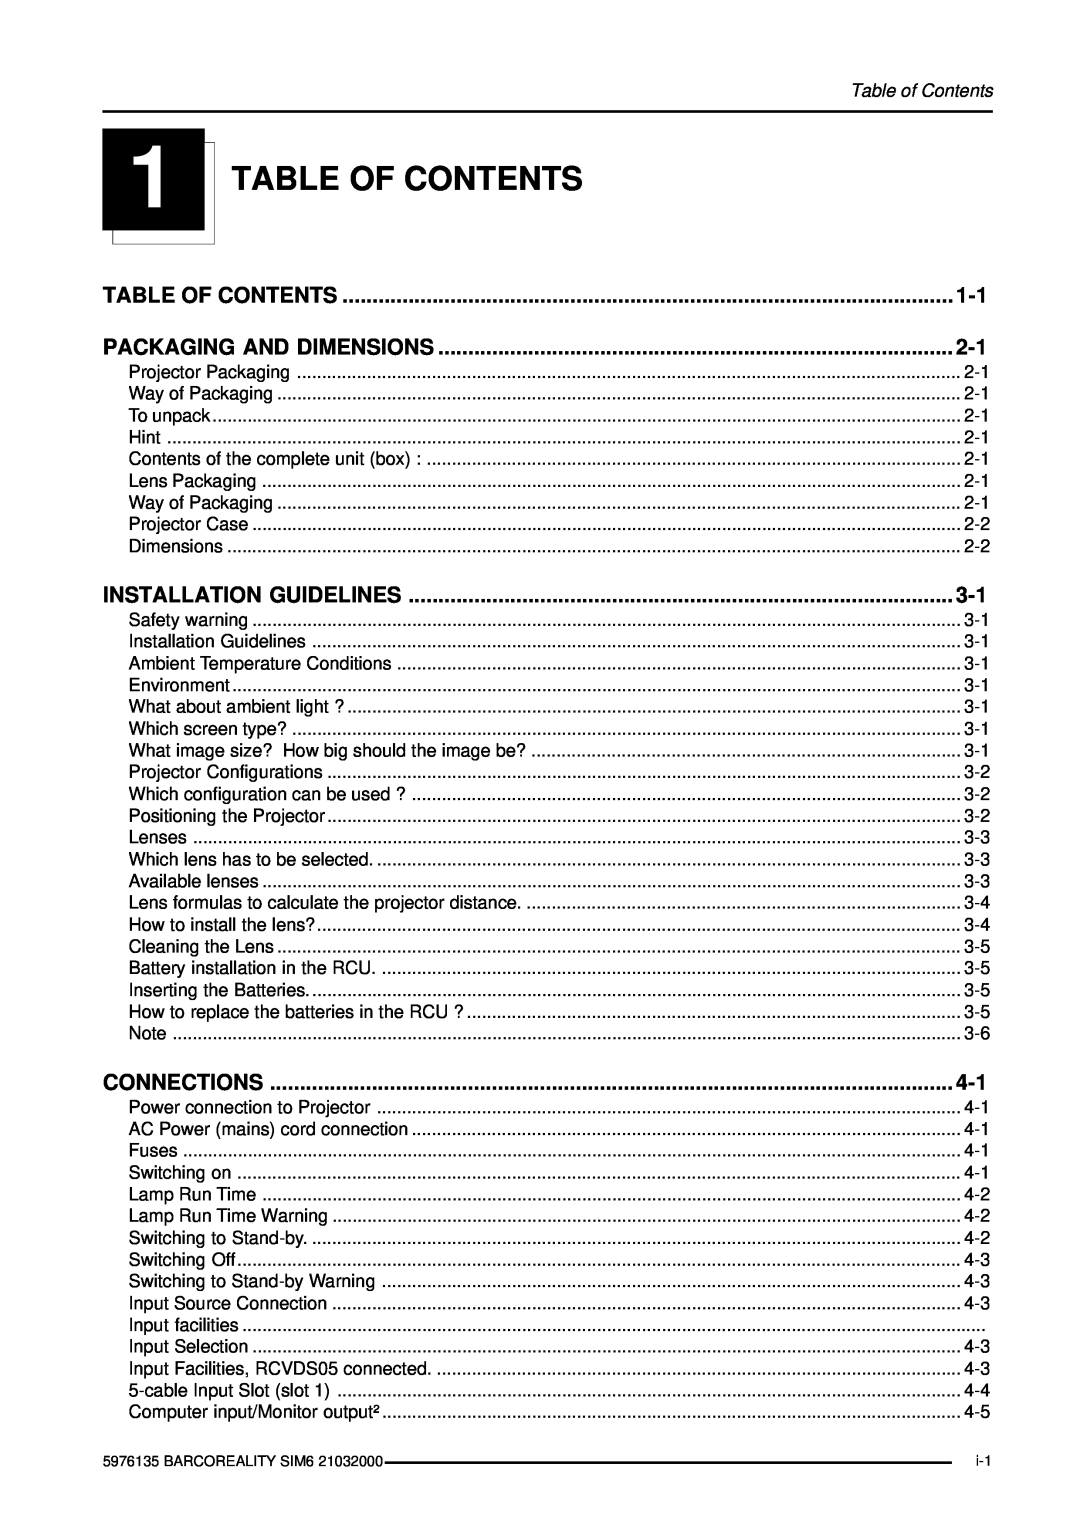 Barco R9040111, R9040110, R9040100 Table Of Contents, Table of Contents, Packaging And Dimensions, Installation Guidelines 